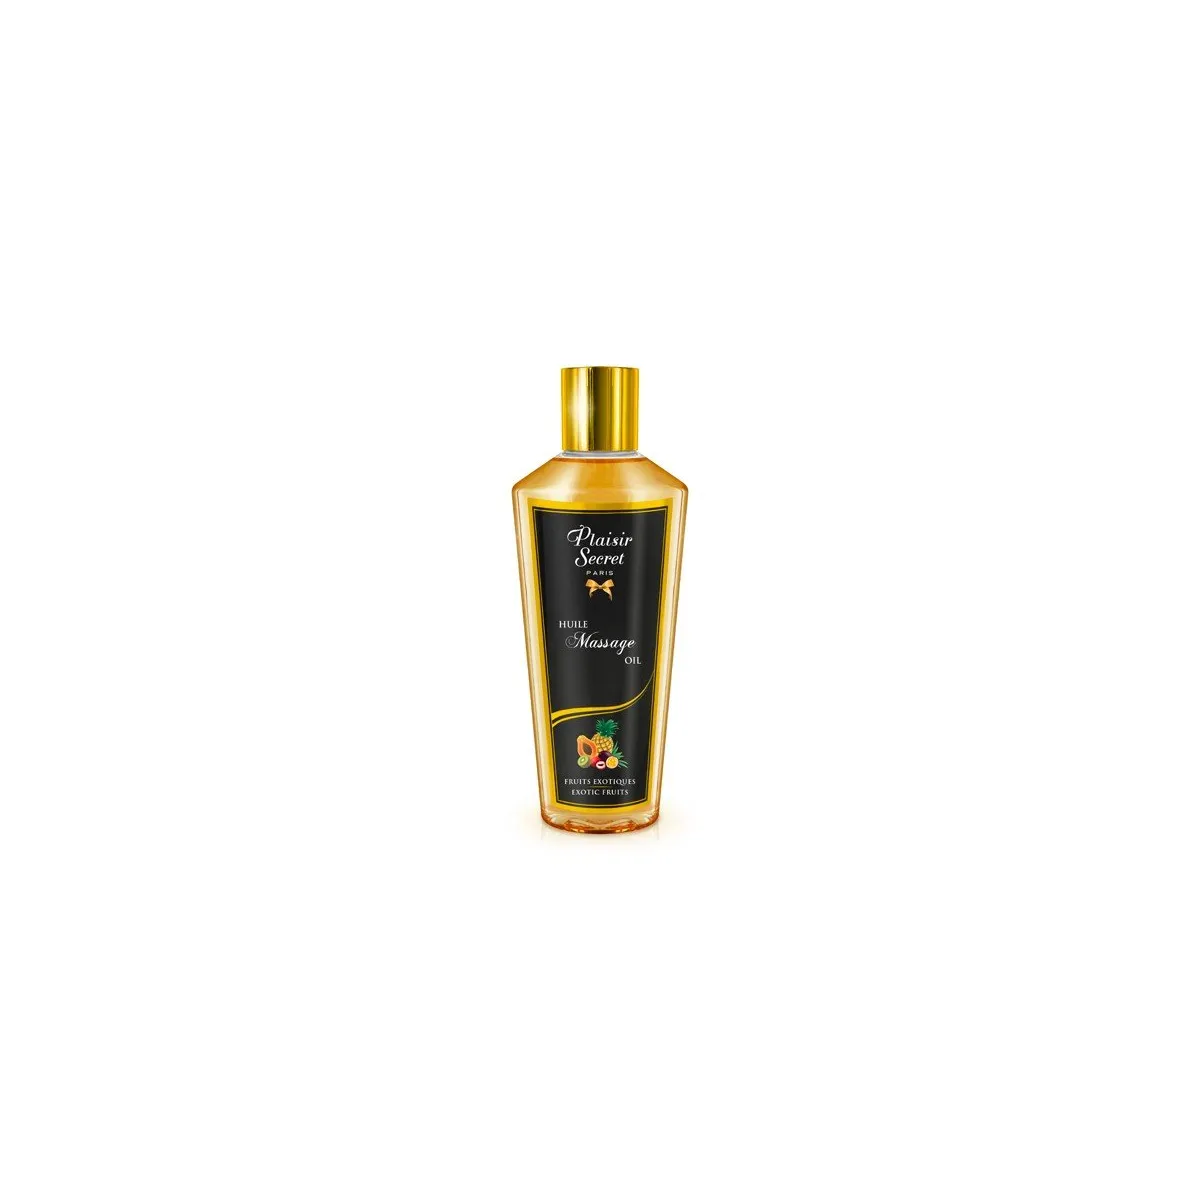 Oil Massage Dry Exotic Fruits 250Ml